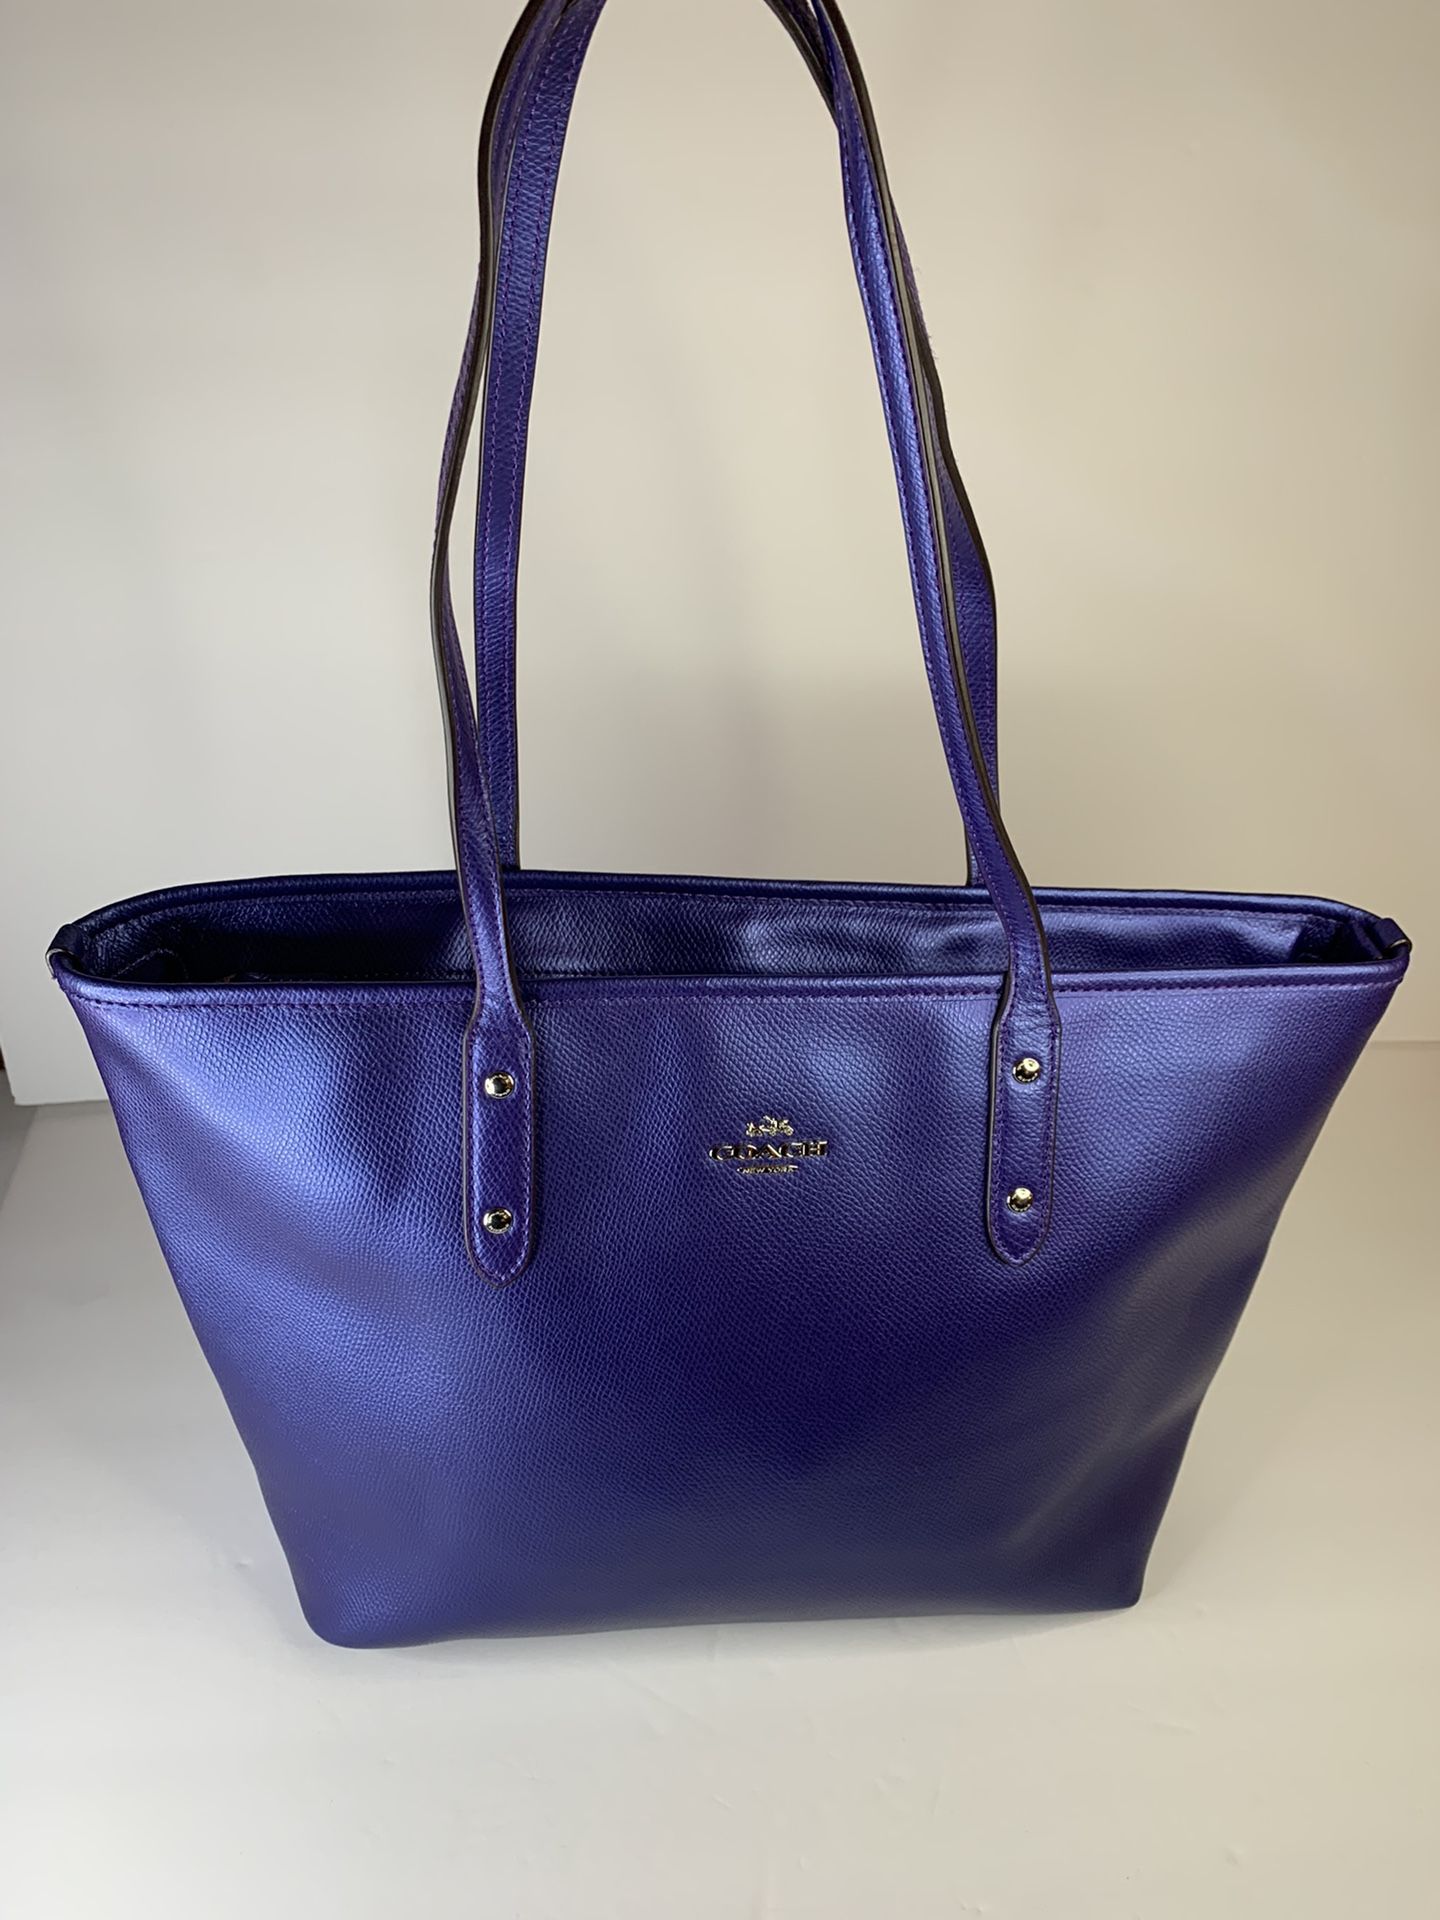 COACH PURPLE ULTRA VIOLET TOTE BAG with zipper for Sale in Farmers Branch,  TX - OfferUp